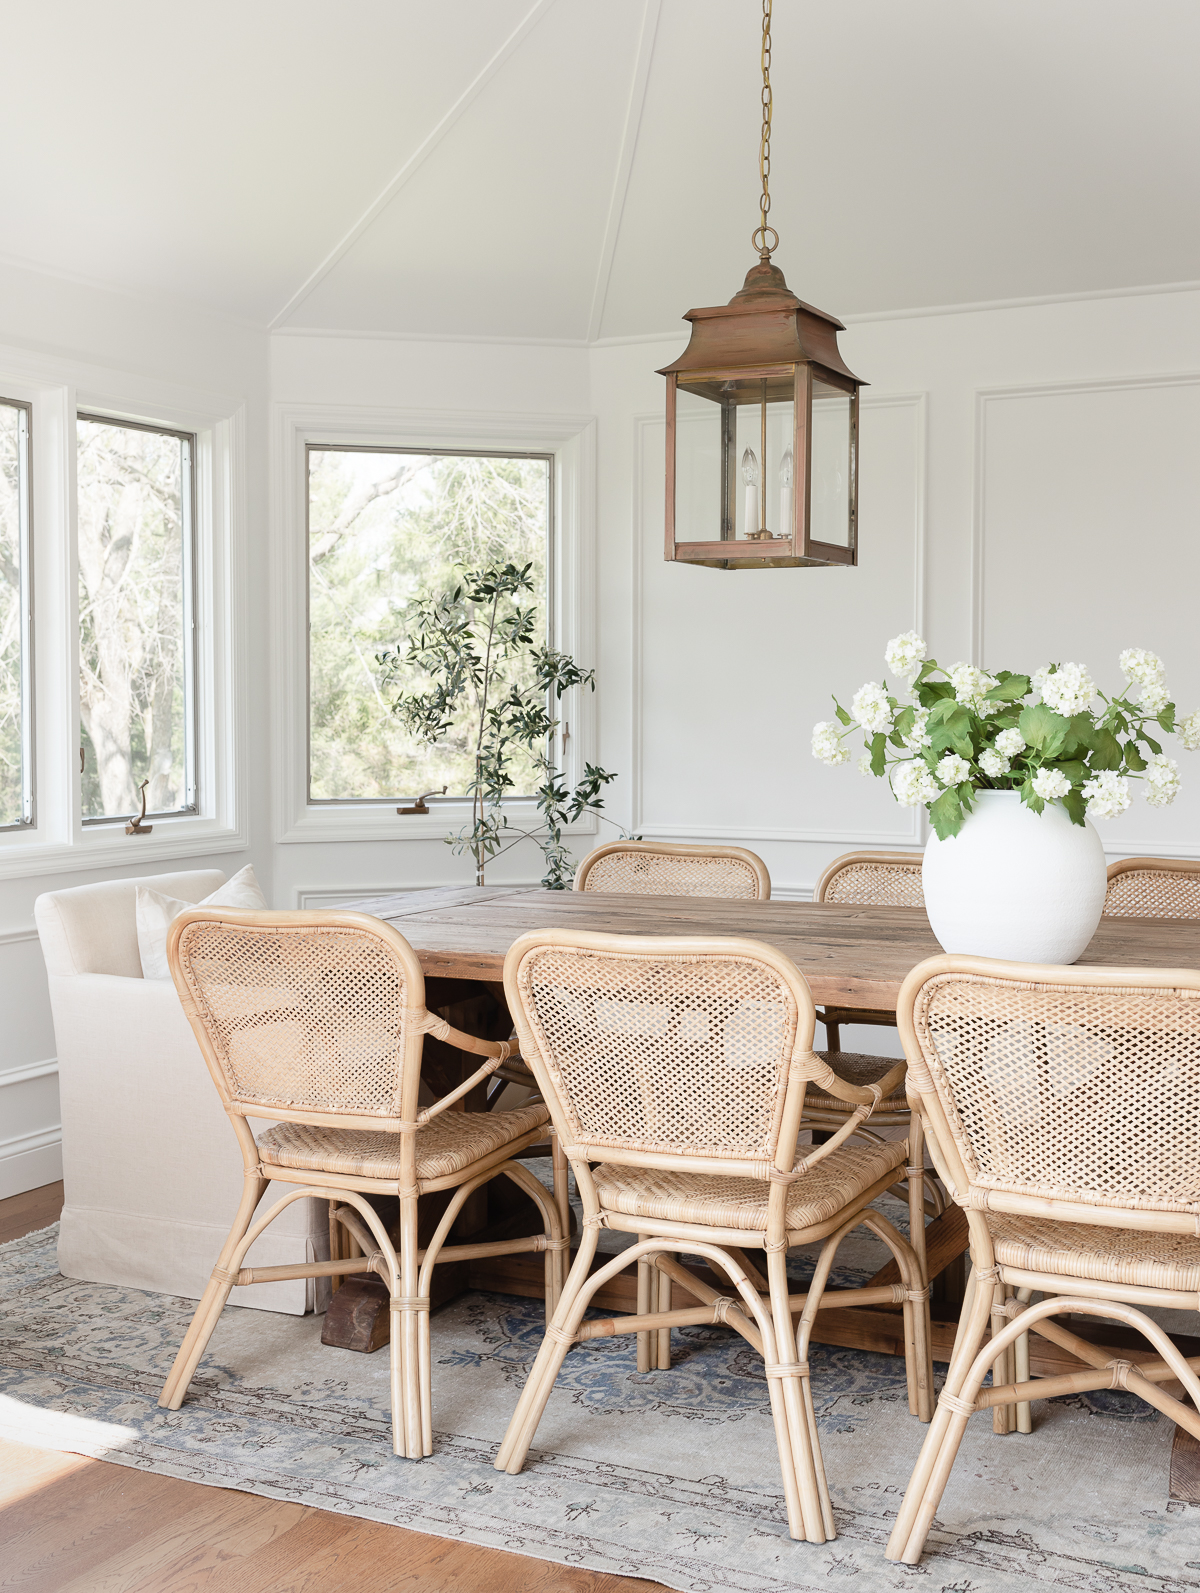 A white dining room with a wood table, rattan chairs and picture frame moulding on the walls.